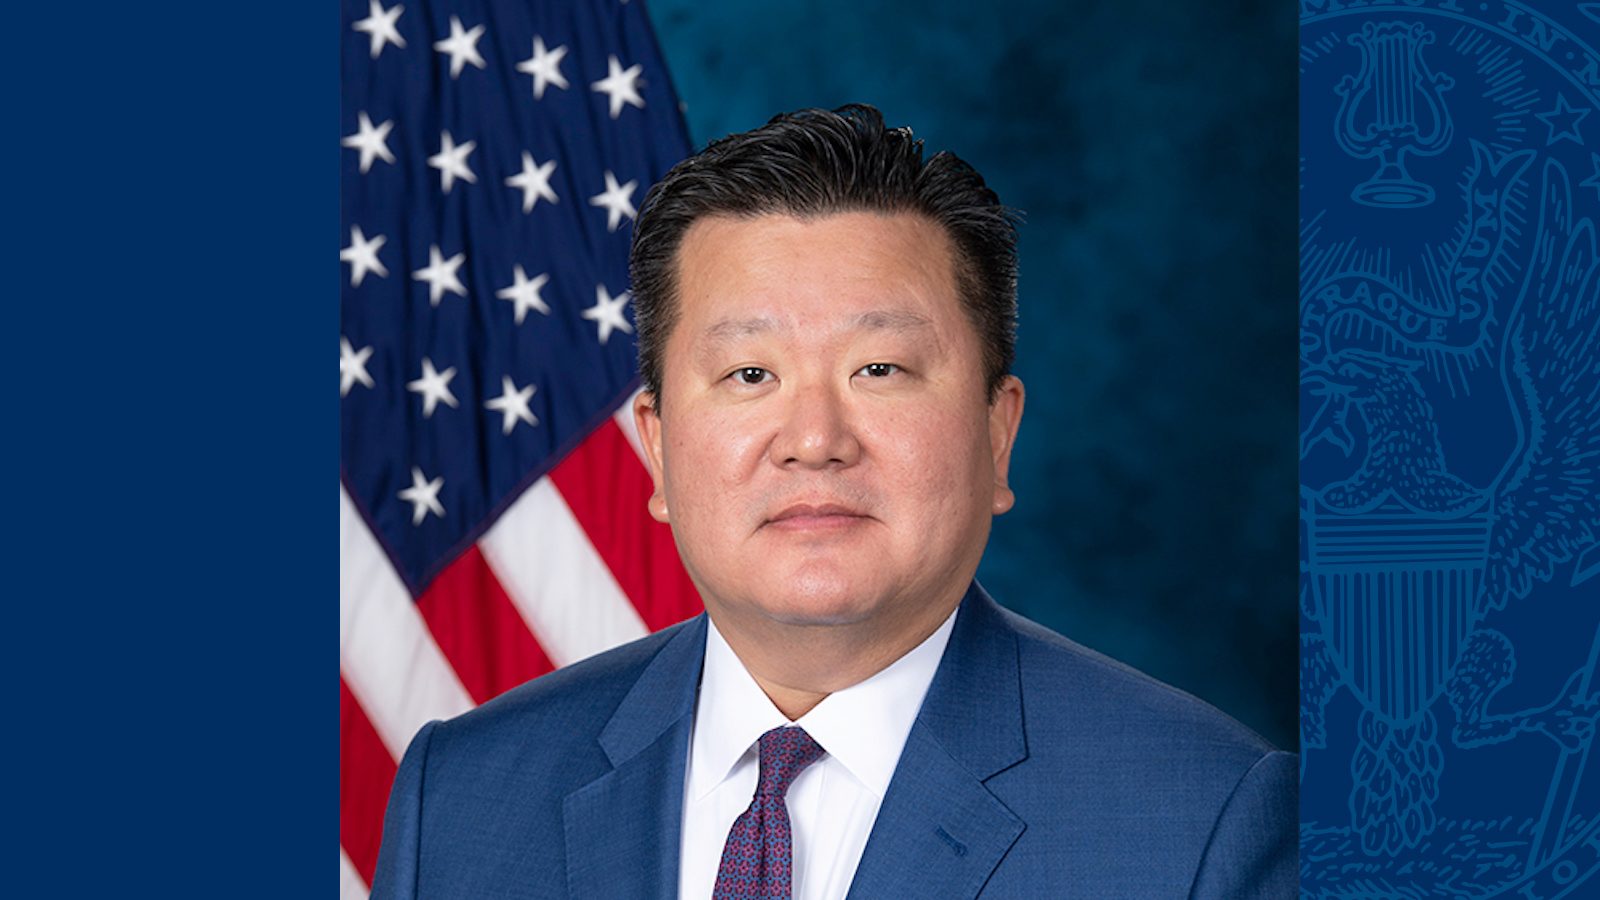 Ryung Suh wears a blue suit and purple tie in front of an American flag